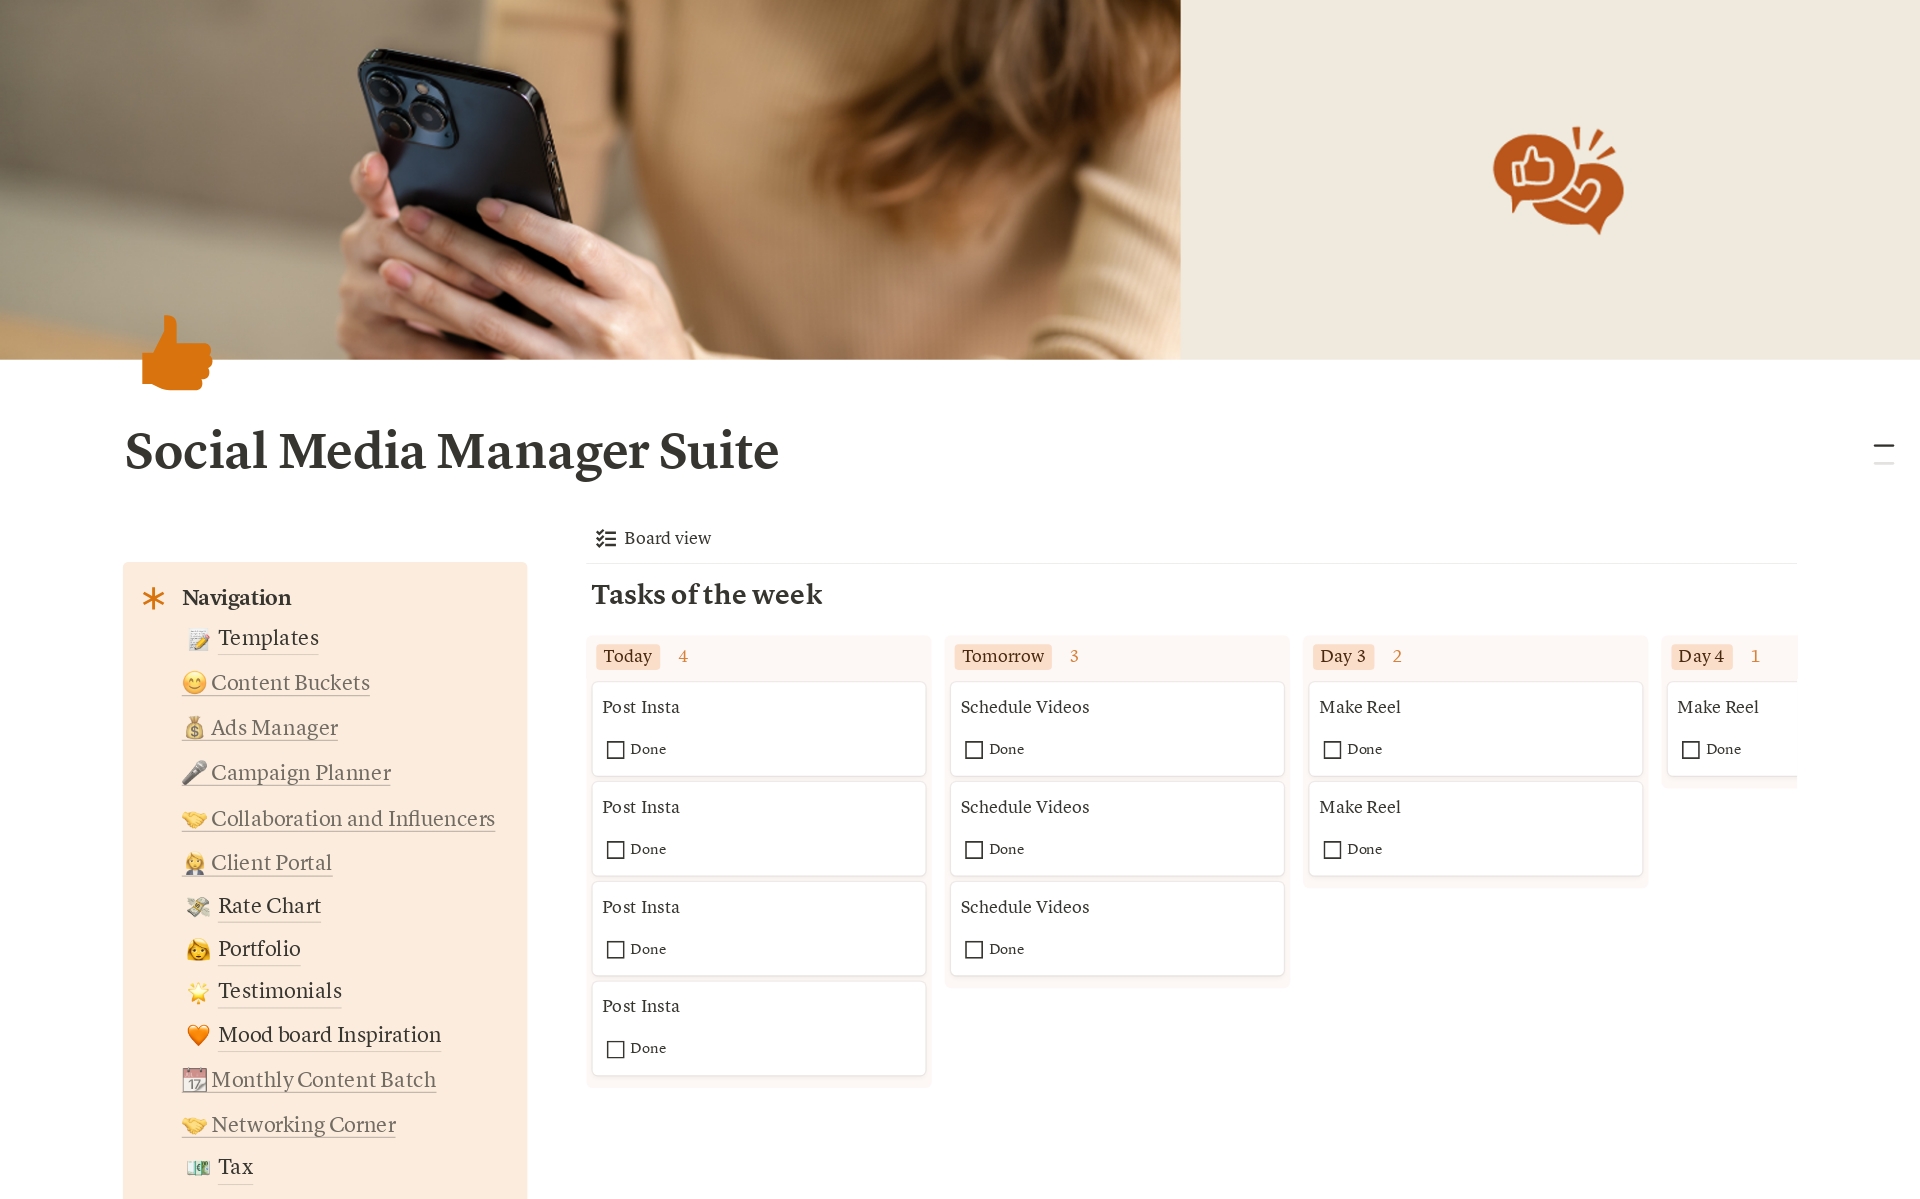 A straightforward workspace for social media managers.

You will love this template if:
✅ You are a social media manager
✅ You love Notion=
✅ You want a multi-functional and easy management system to manage your projects
✅ You would like to customize it according to your needs